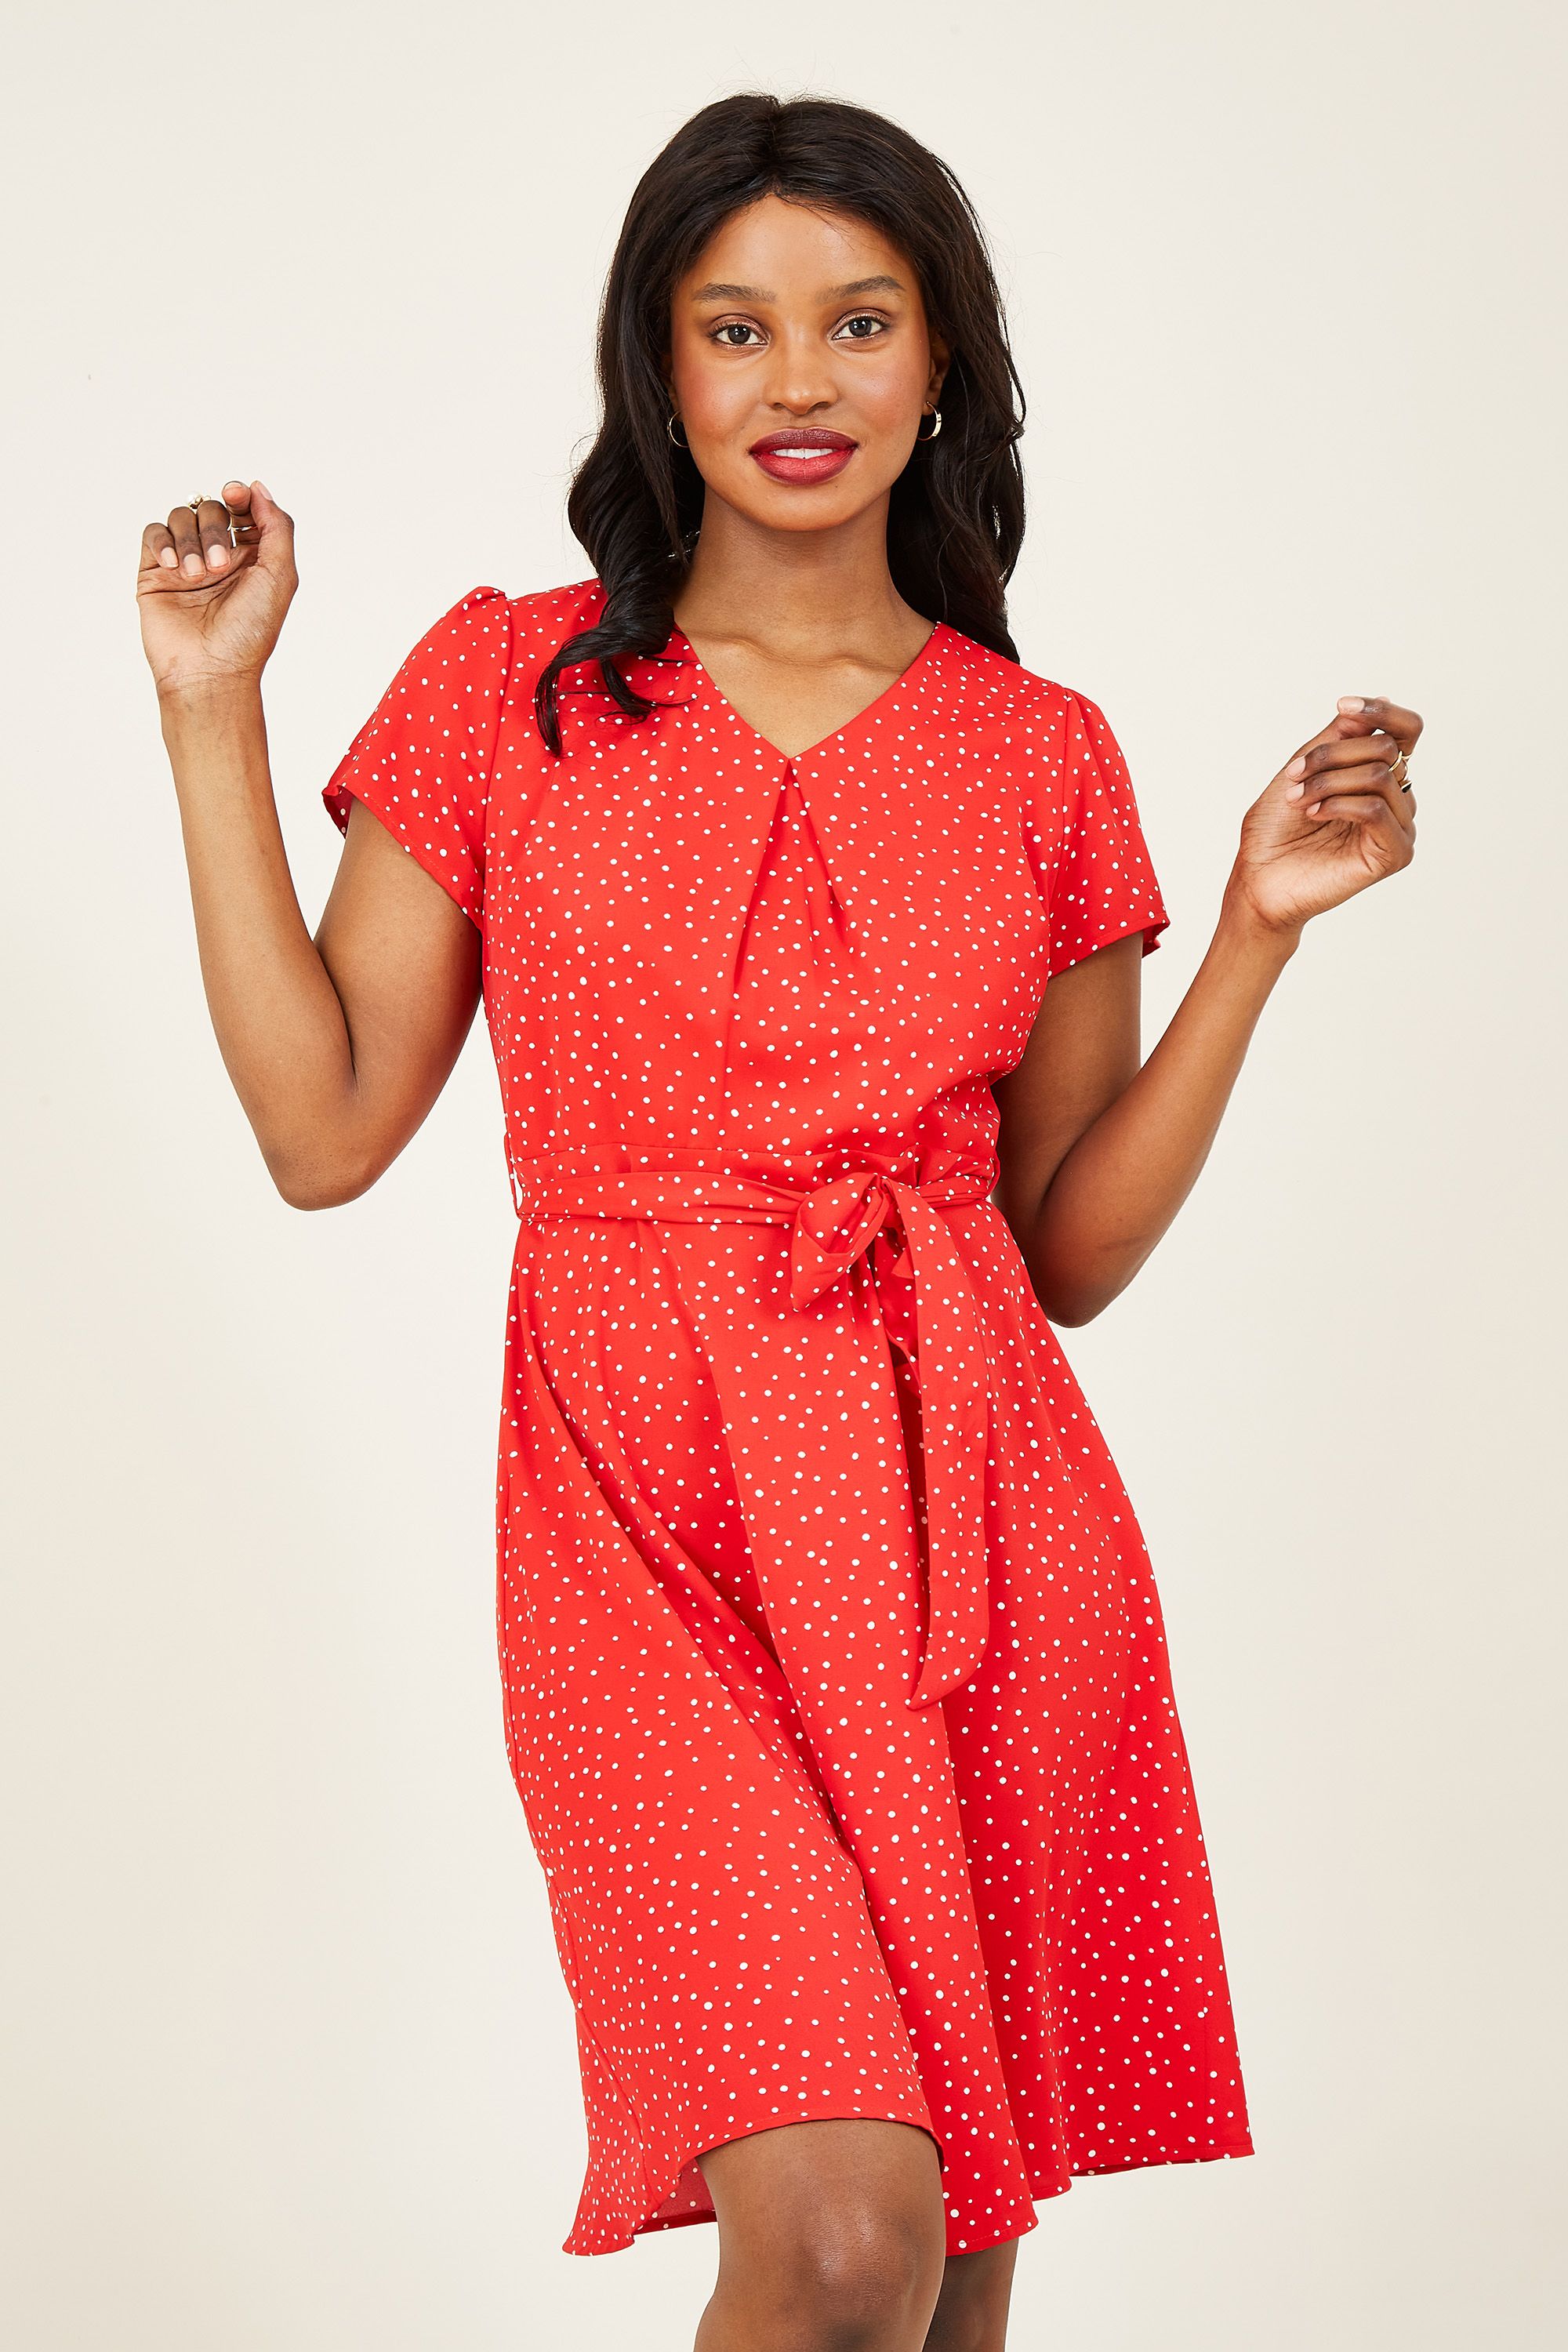 Our fail-safe Spot Skater Dress is the daytime to dinner piece. Showcasing a ditsy spot print flowing through soft polyester, it's cut in the fit and flare shape you adore. A V-neckline keeps profile look balanced, with a zip fastening on the back to finish. Dress it up with heels and a clutch.